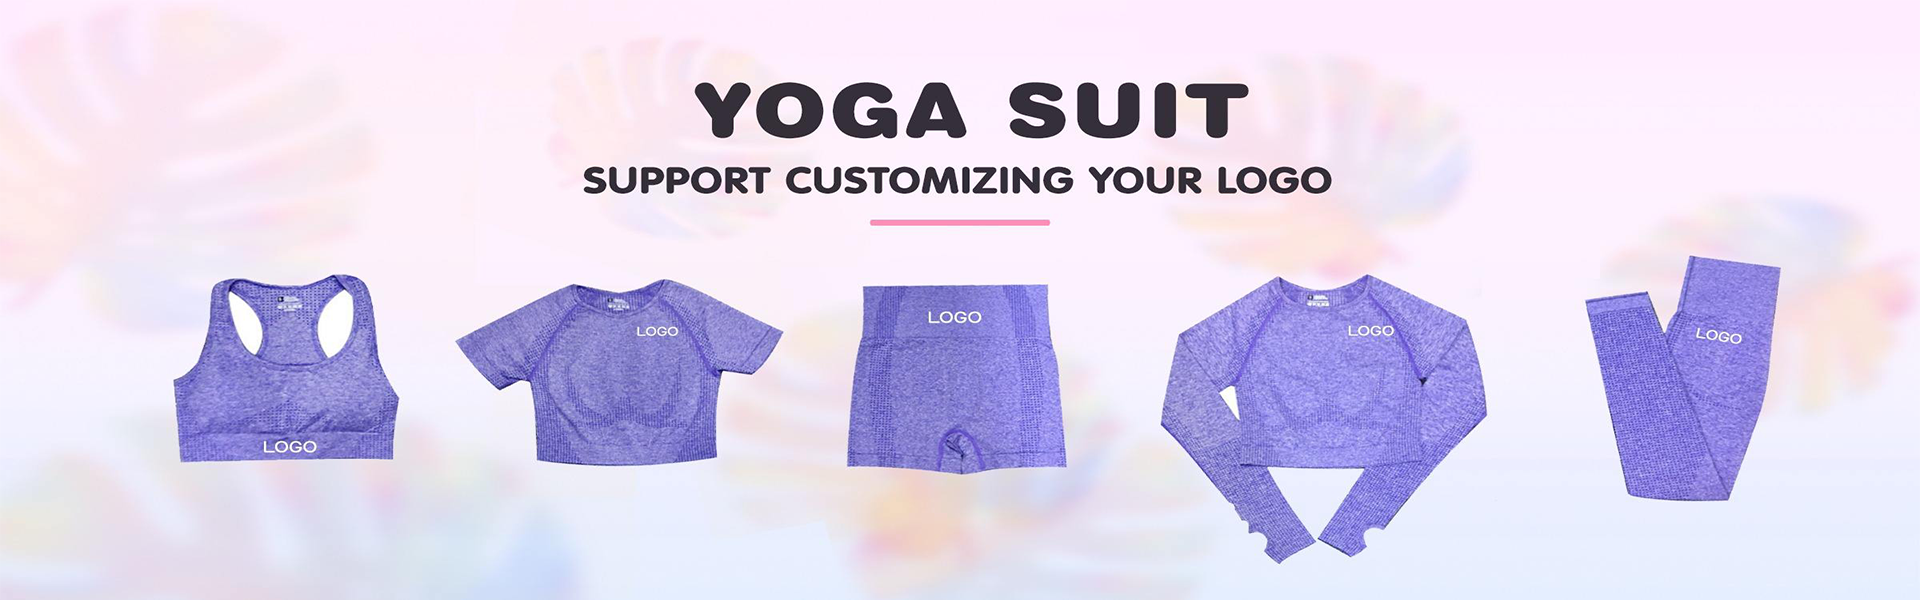 Branded for your yoga cloth